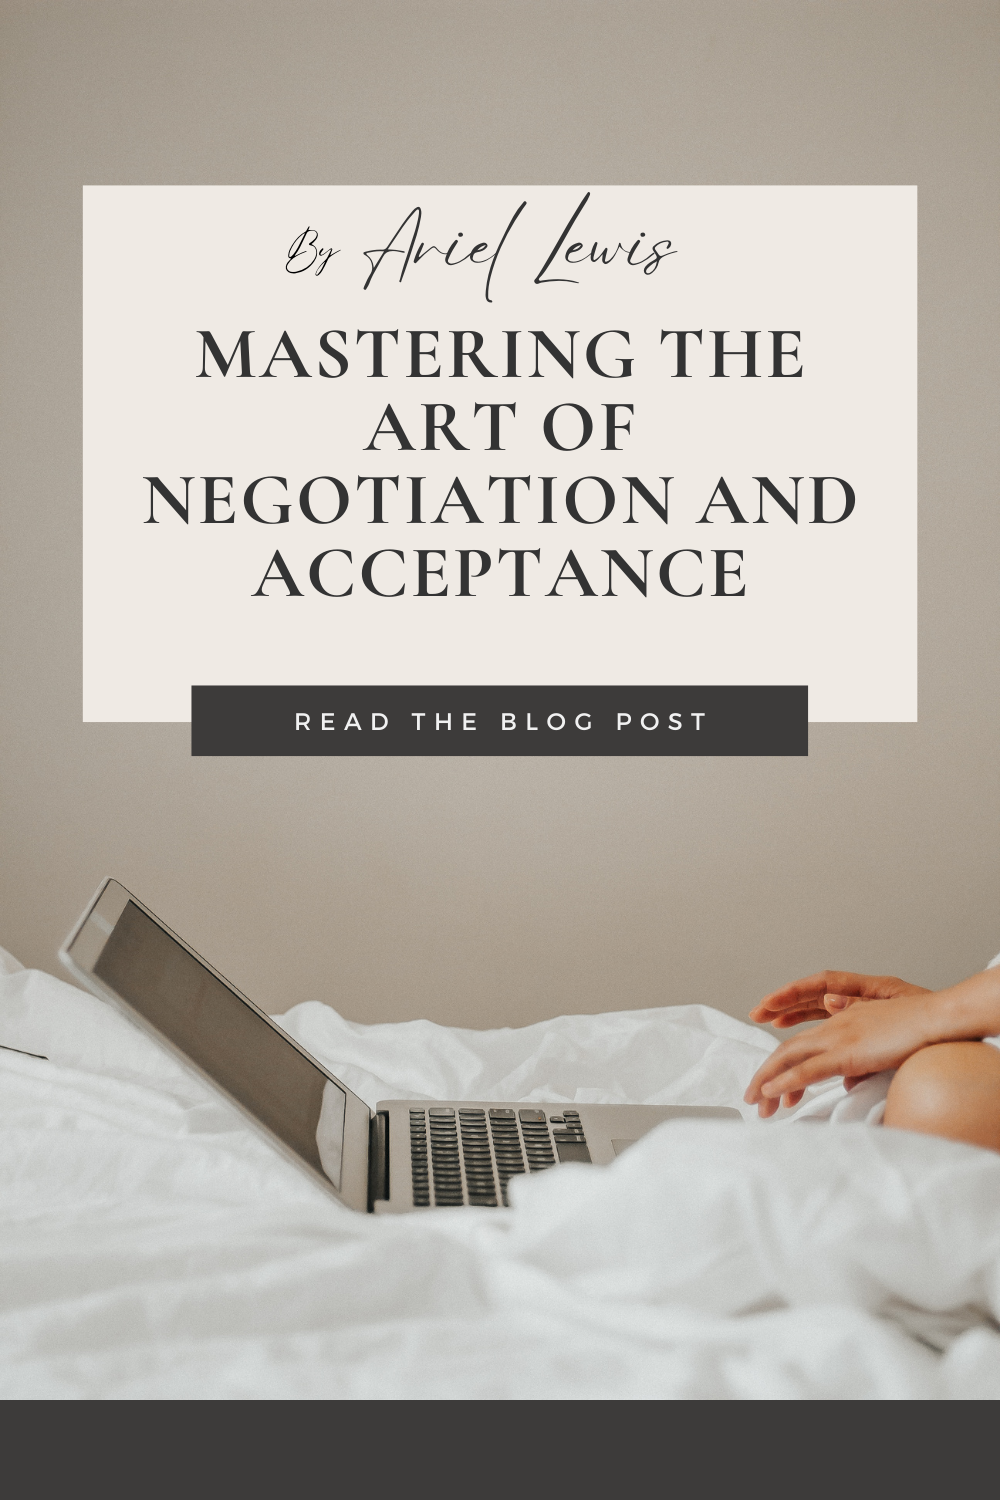 Mastering the Art of Negotiation and Acceptance
